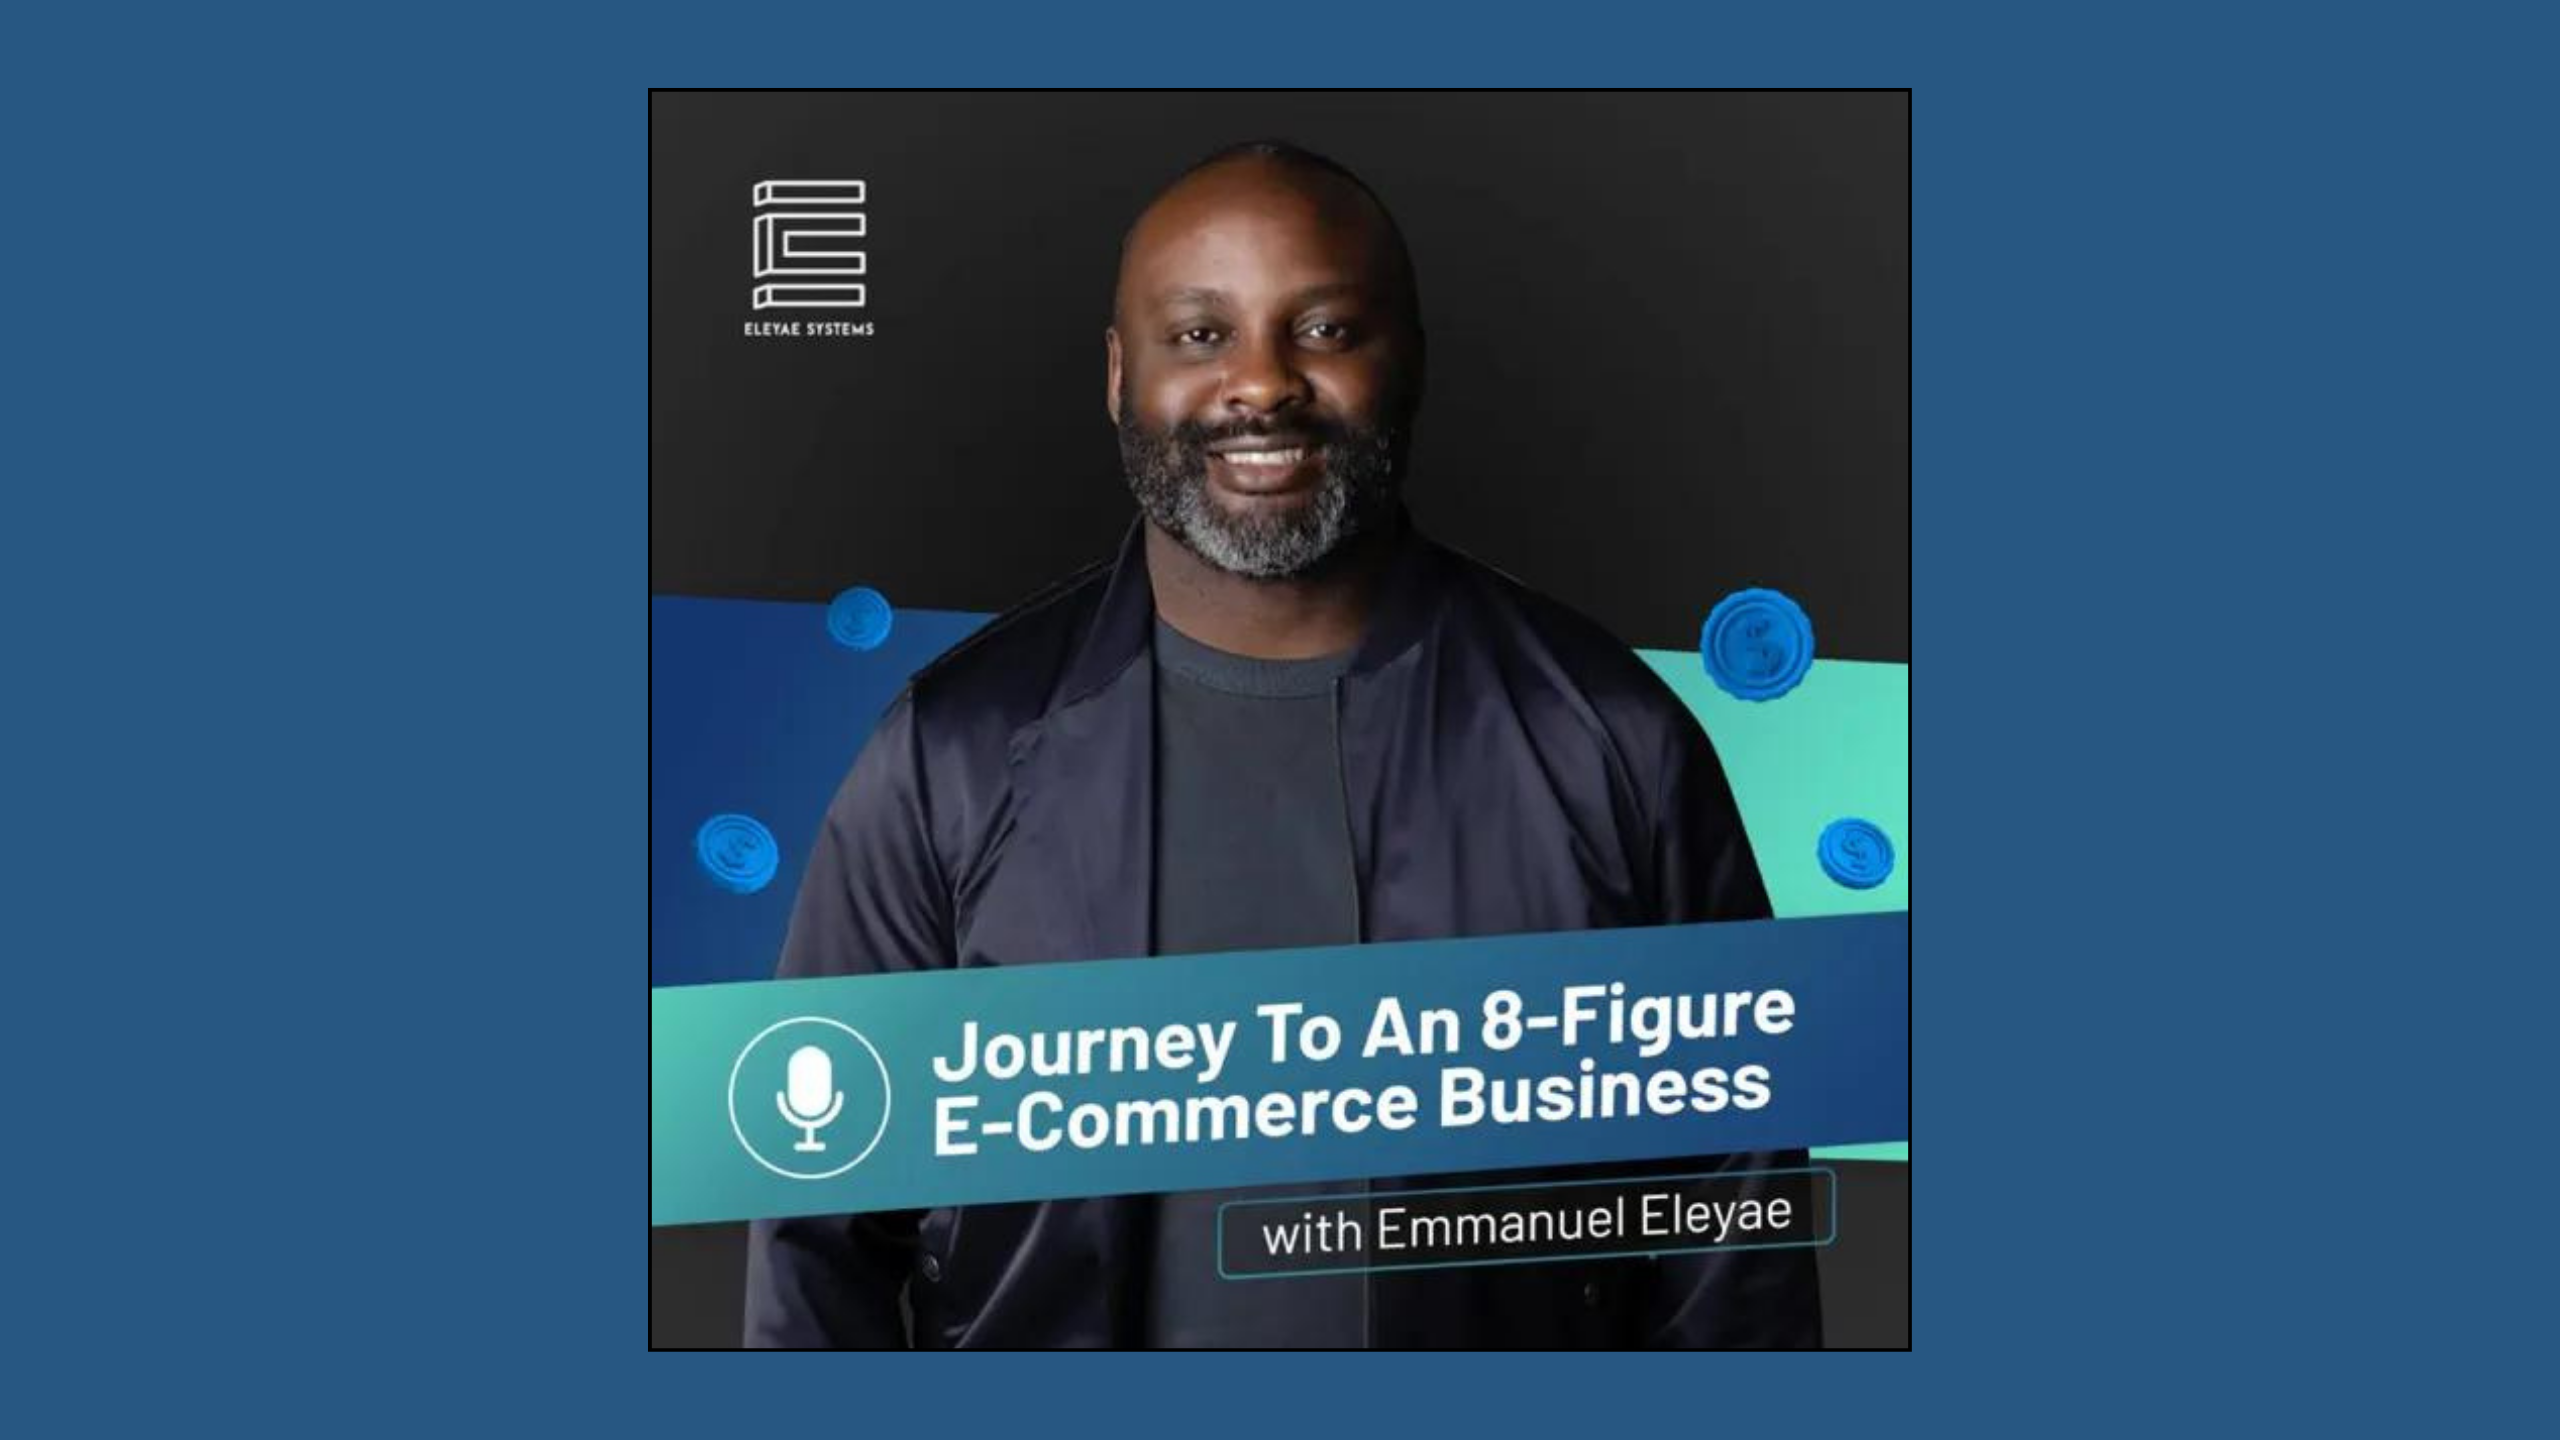 A podcast cover featuring a smiling man with a beard, wearing a dark jacket, against a blue and teal background with blue coins. The title reads "Journey To An 8-Figure E-Commerce Business with Emmanuel Eleyae.